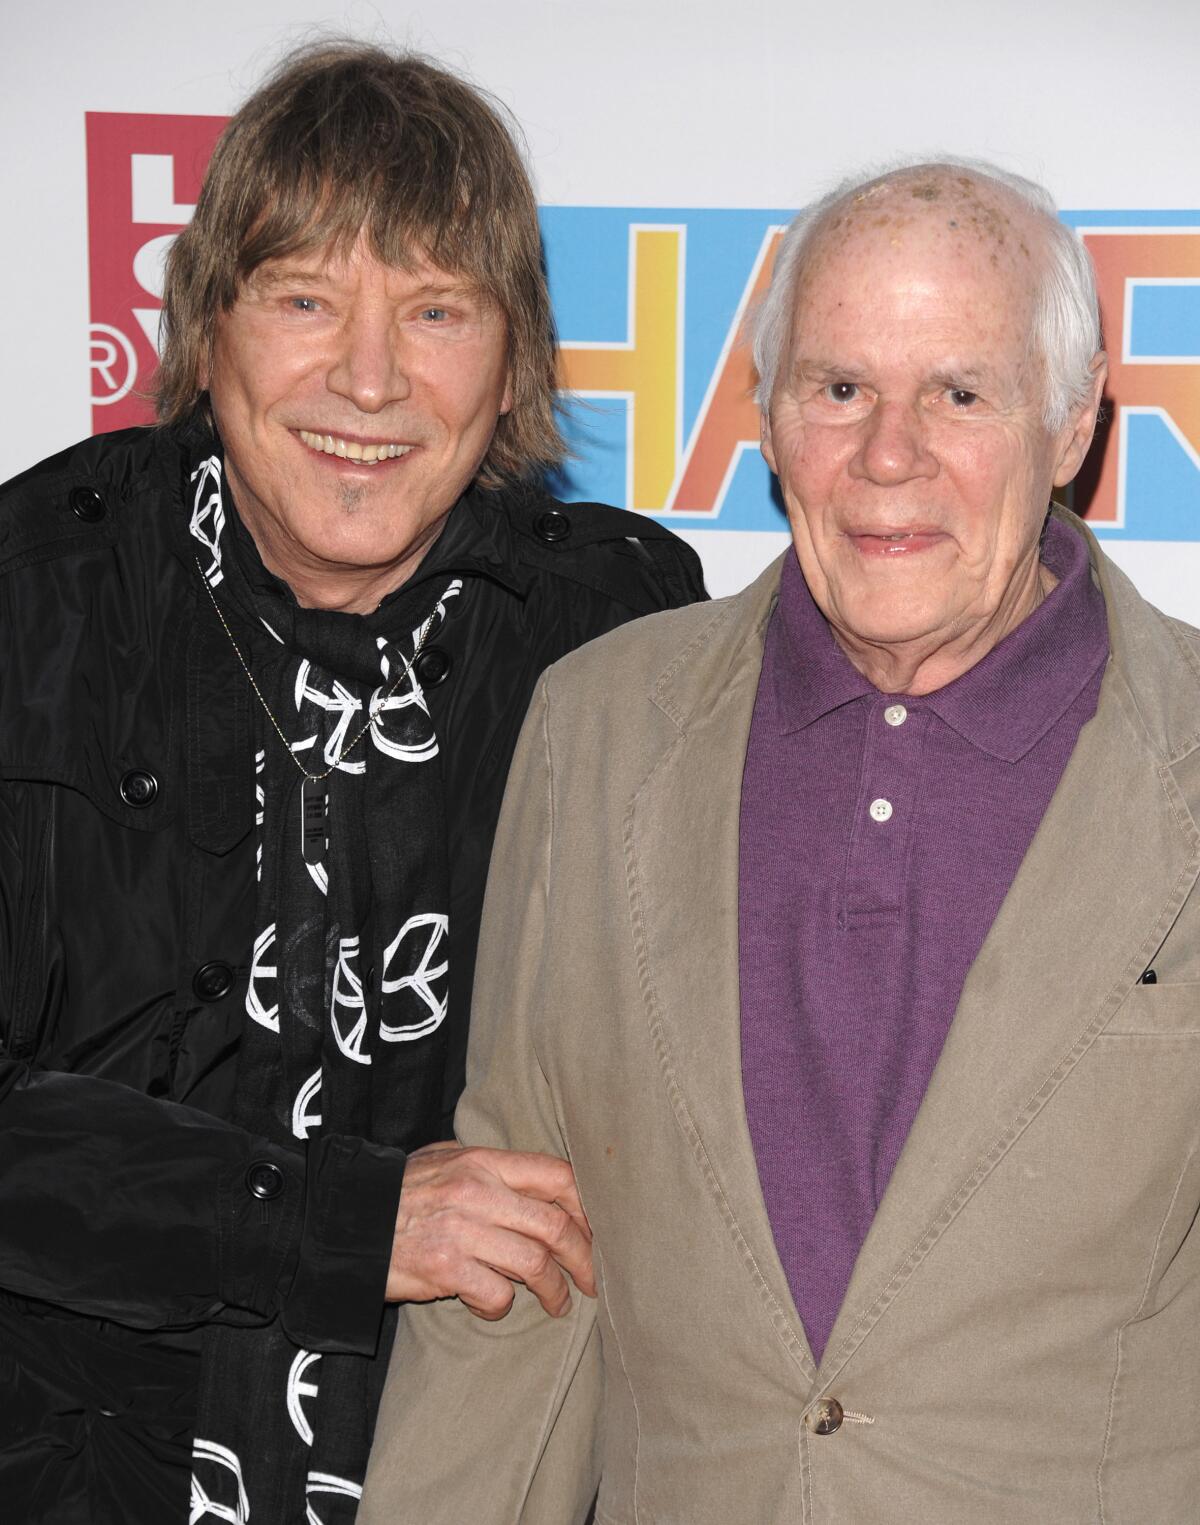 Two men smile for a photo. One wears a black shirt with peace symbols; the other is in a polo shirt and jacket.